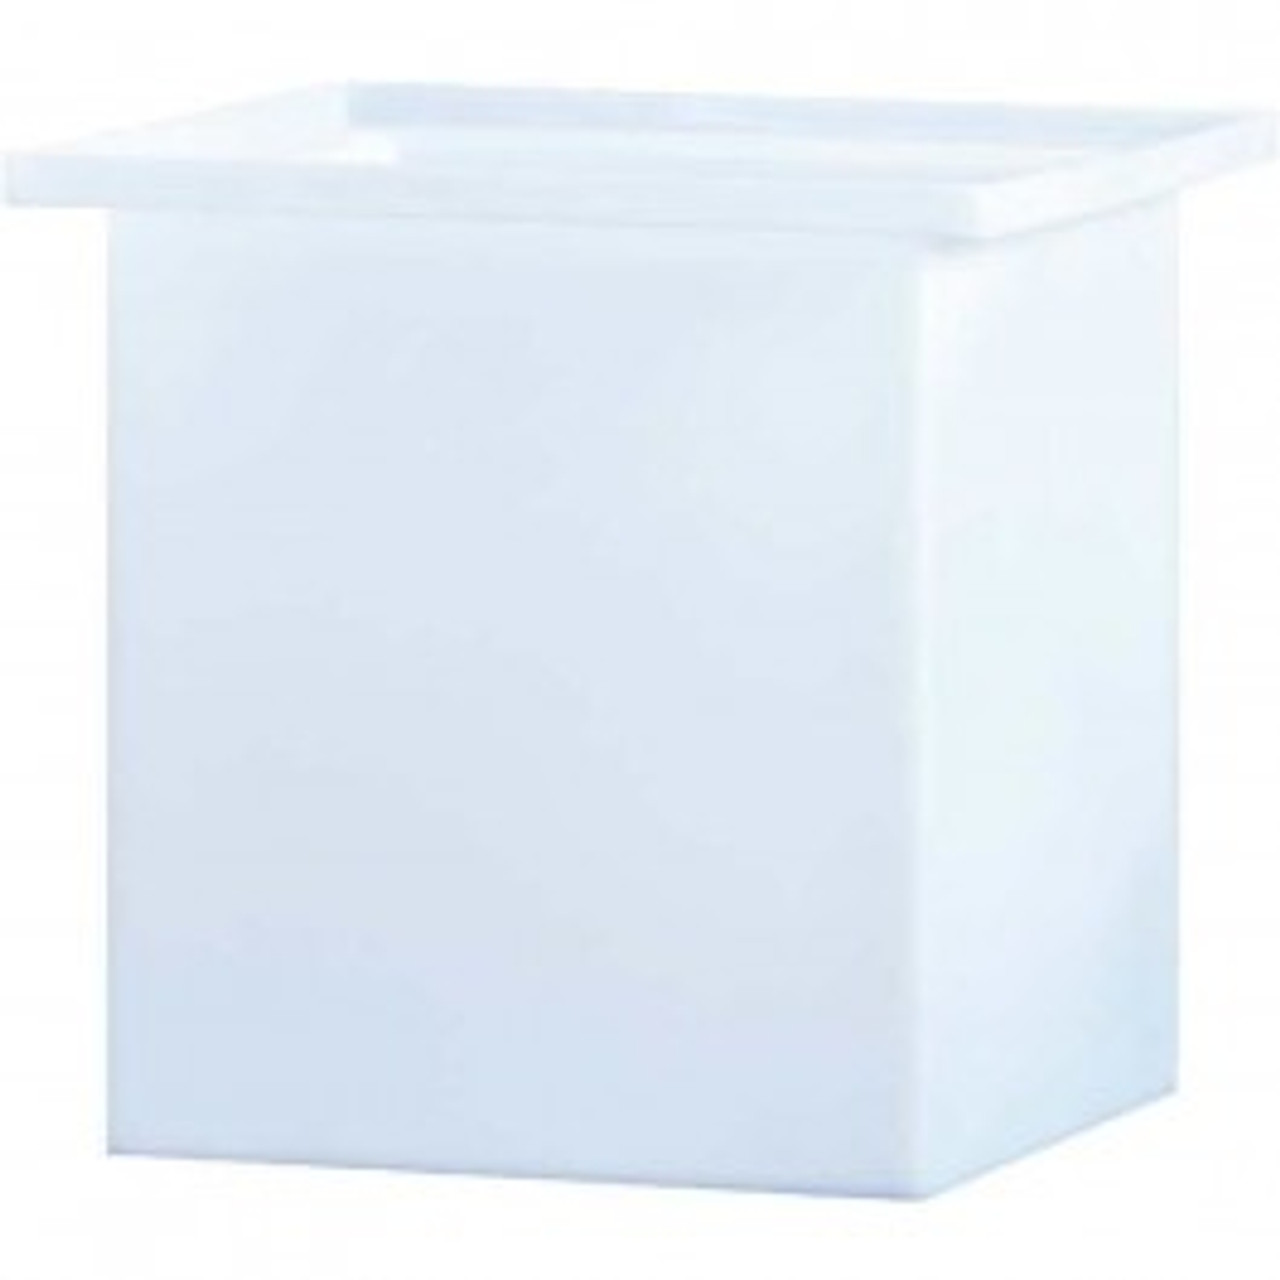 An image of a 14 Gallon PE Chem-Tainer White Rectangular Open Top Tank | R121815A